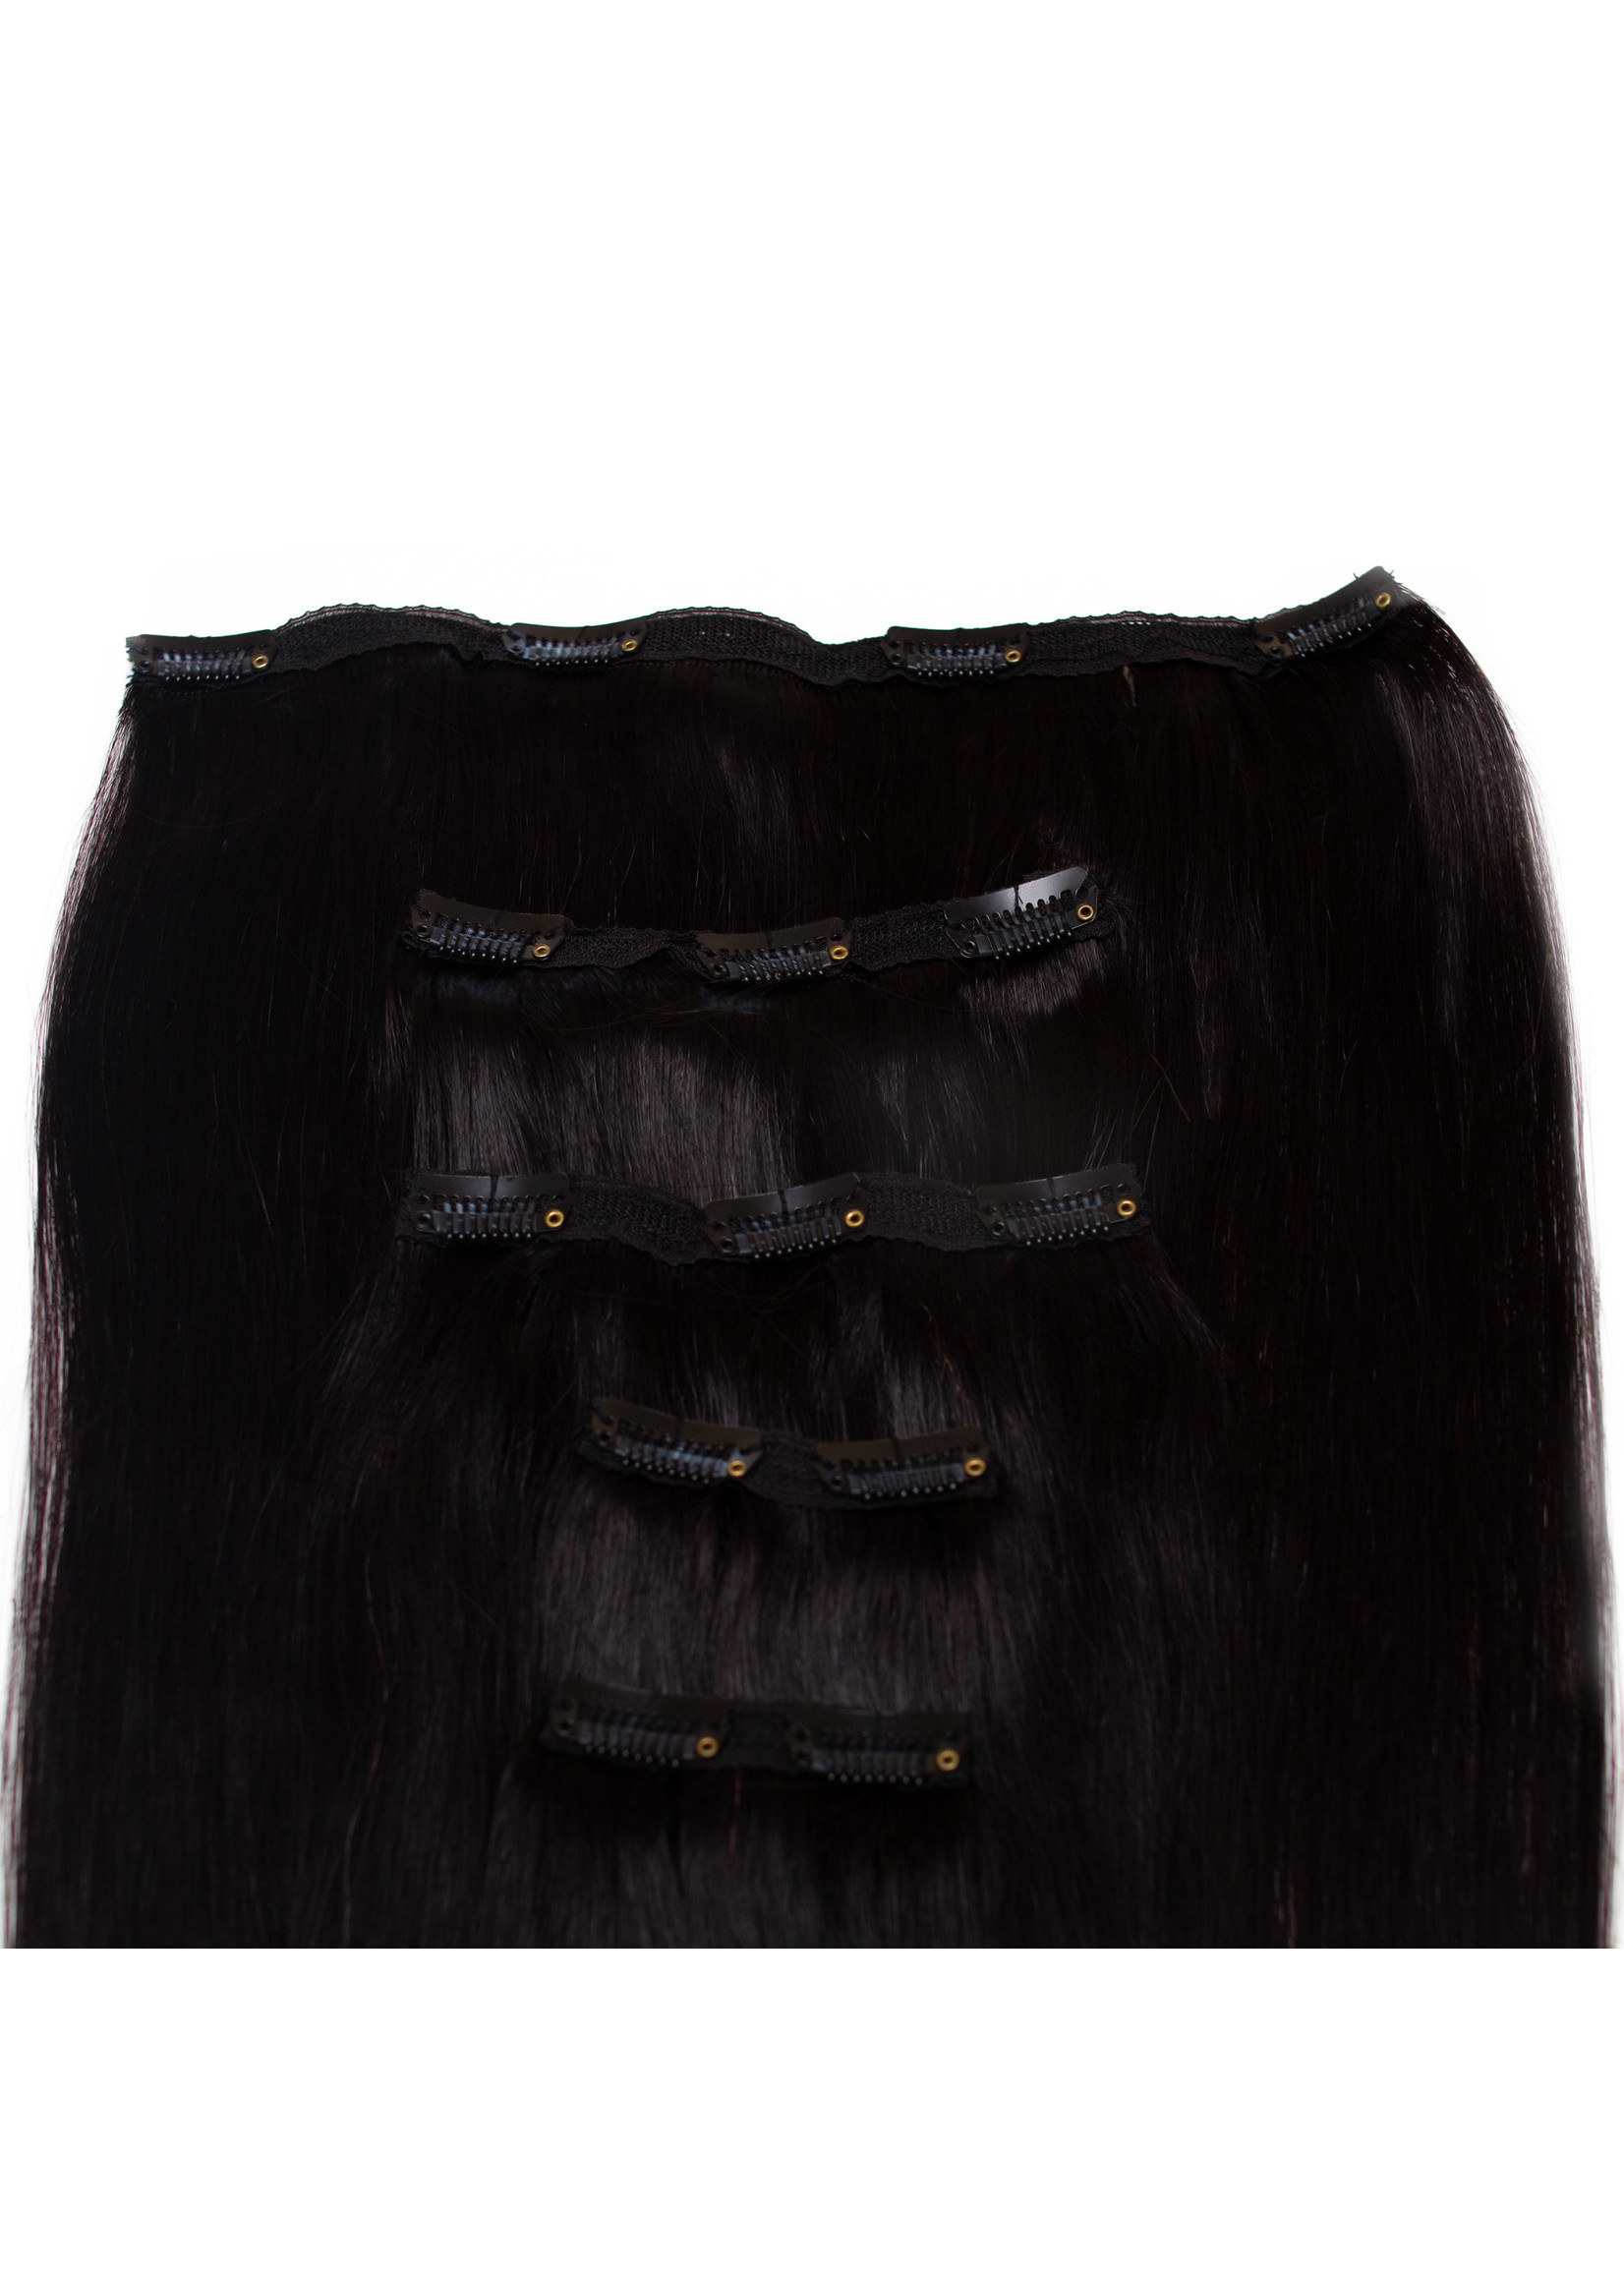 Seamless1 Seamless1 Human Hair Clip-in 5pc Hair Extensions 21.5 Inches - Ritzy